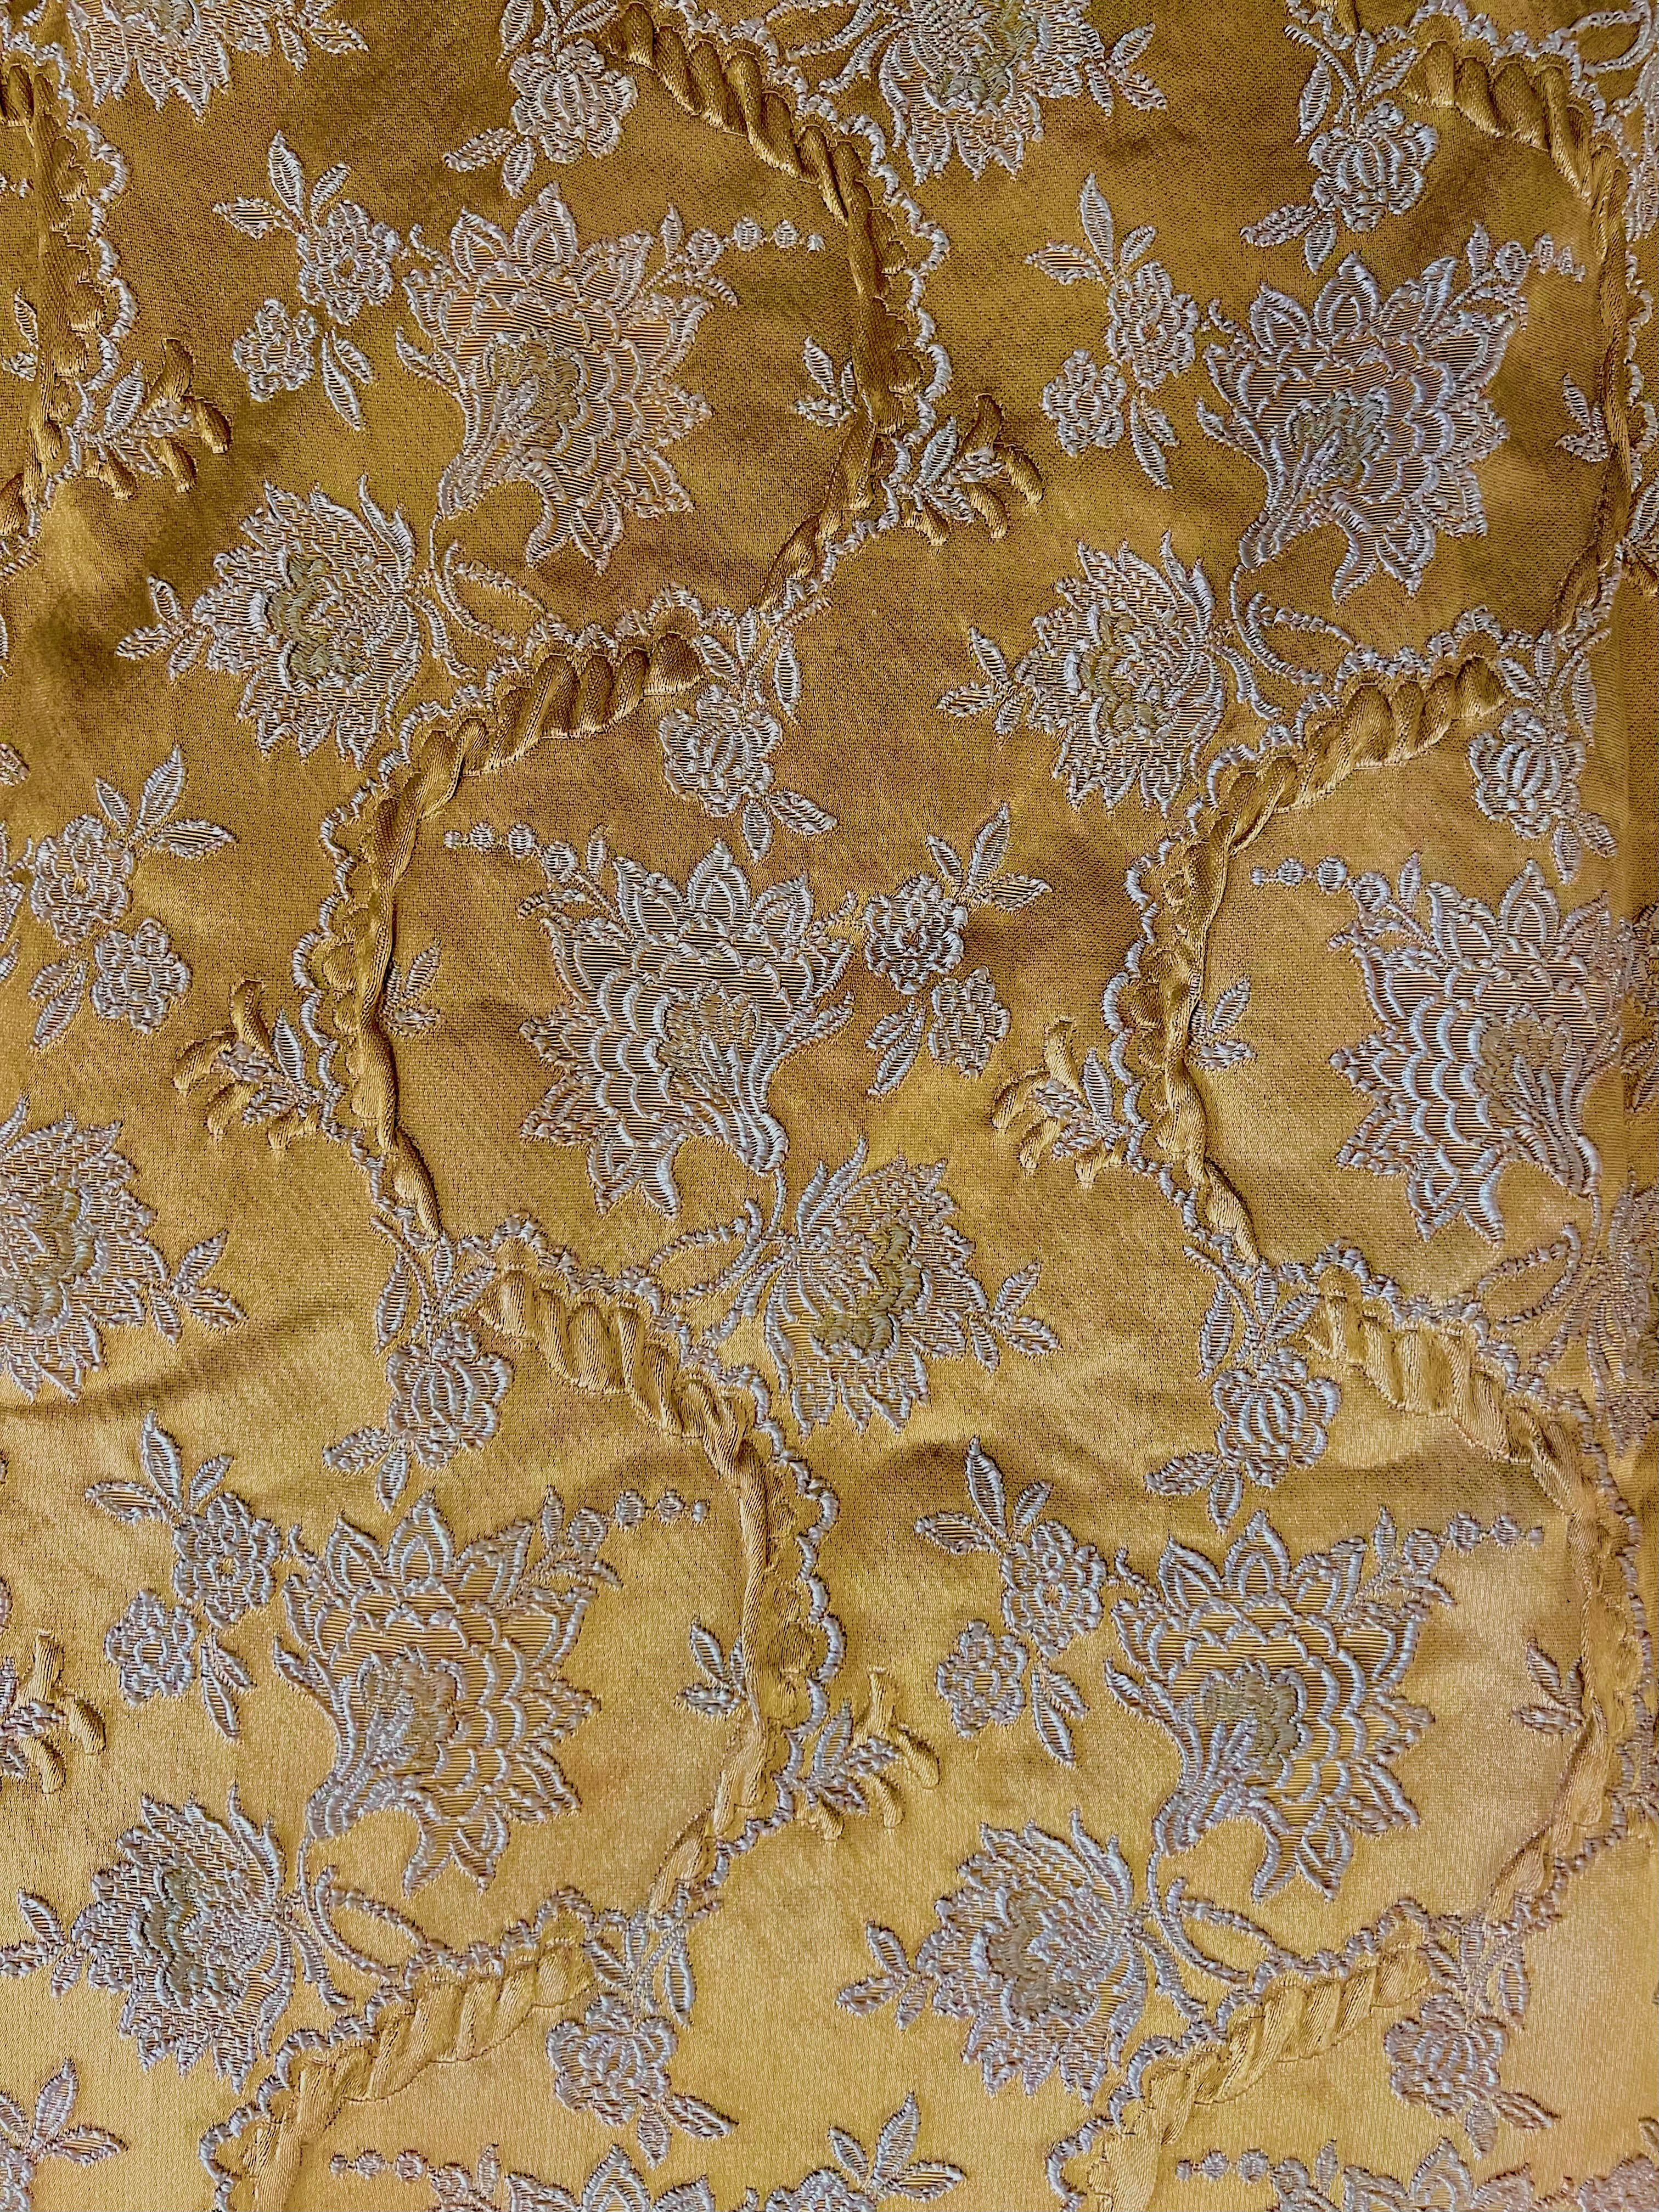 Three single curtains in vintage gold, damask style fabric with raised pattern, possibly 1950s/ 60s, - Image 2 of 4